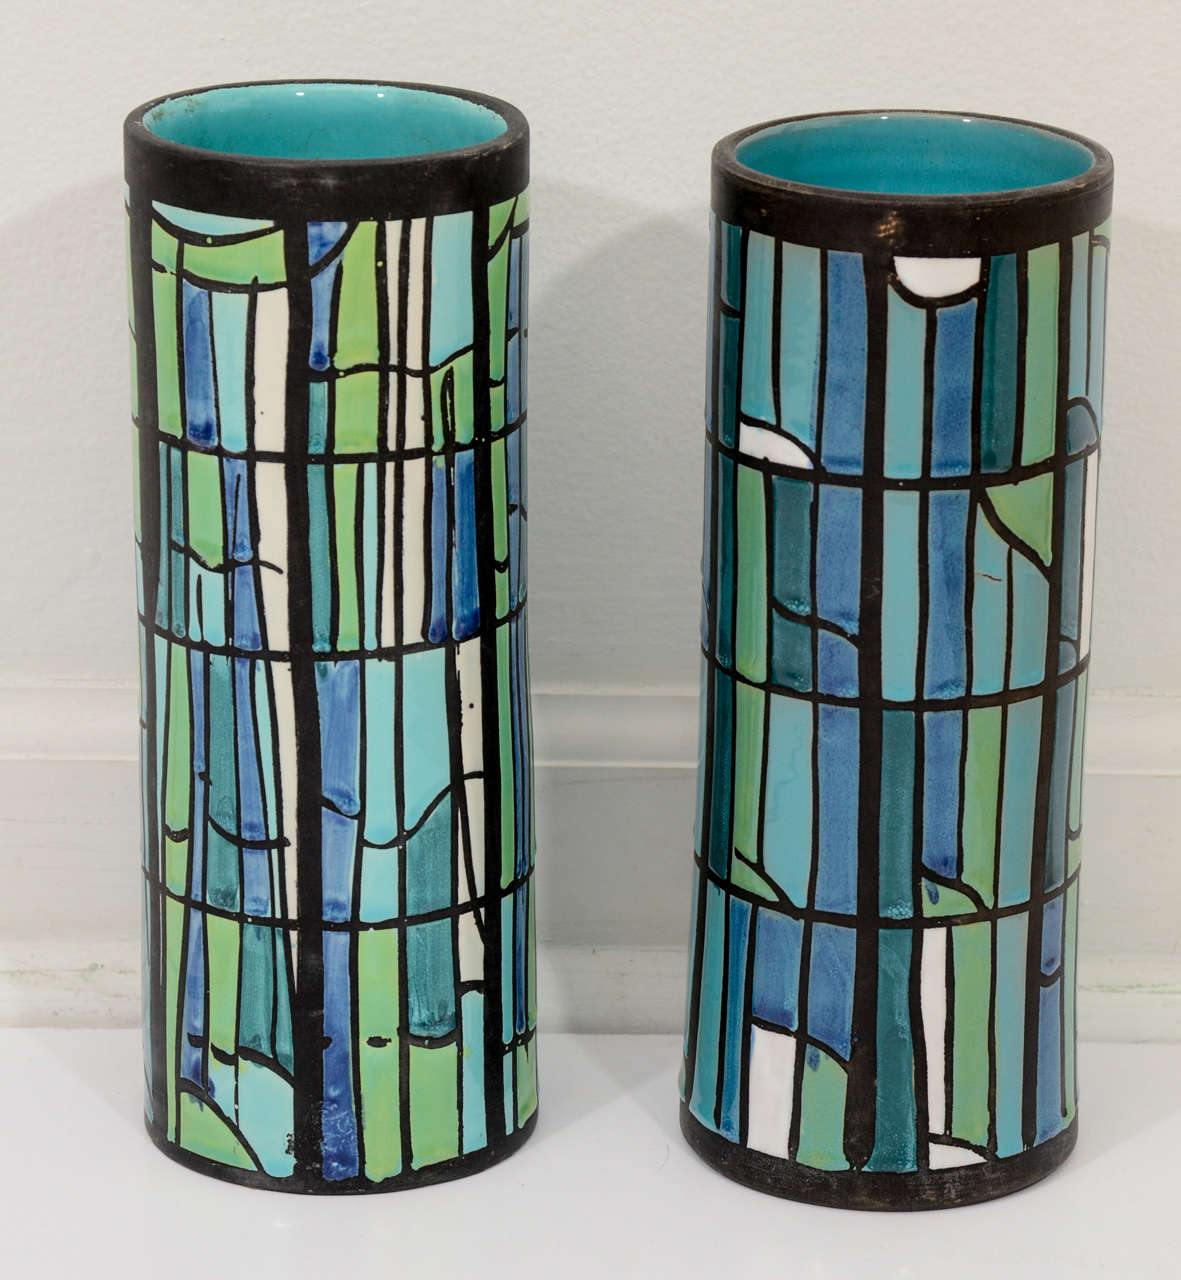 Italian ceramic vase pair in breezy blues and greens, accented with a solid aqua glaze to interior. Signed Bitossi for Raymor.